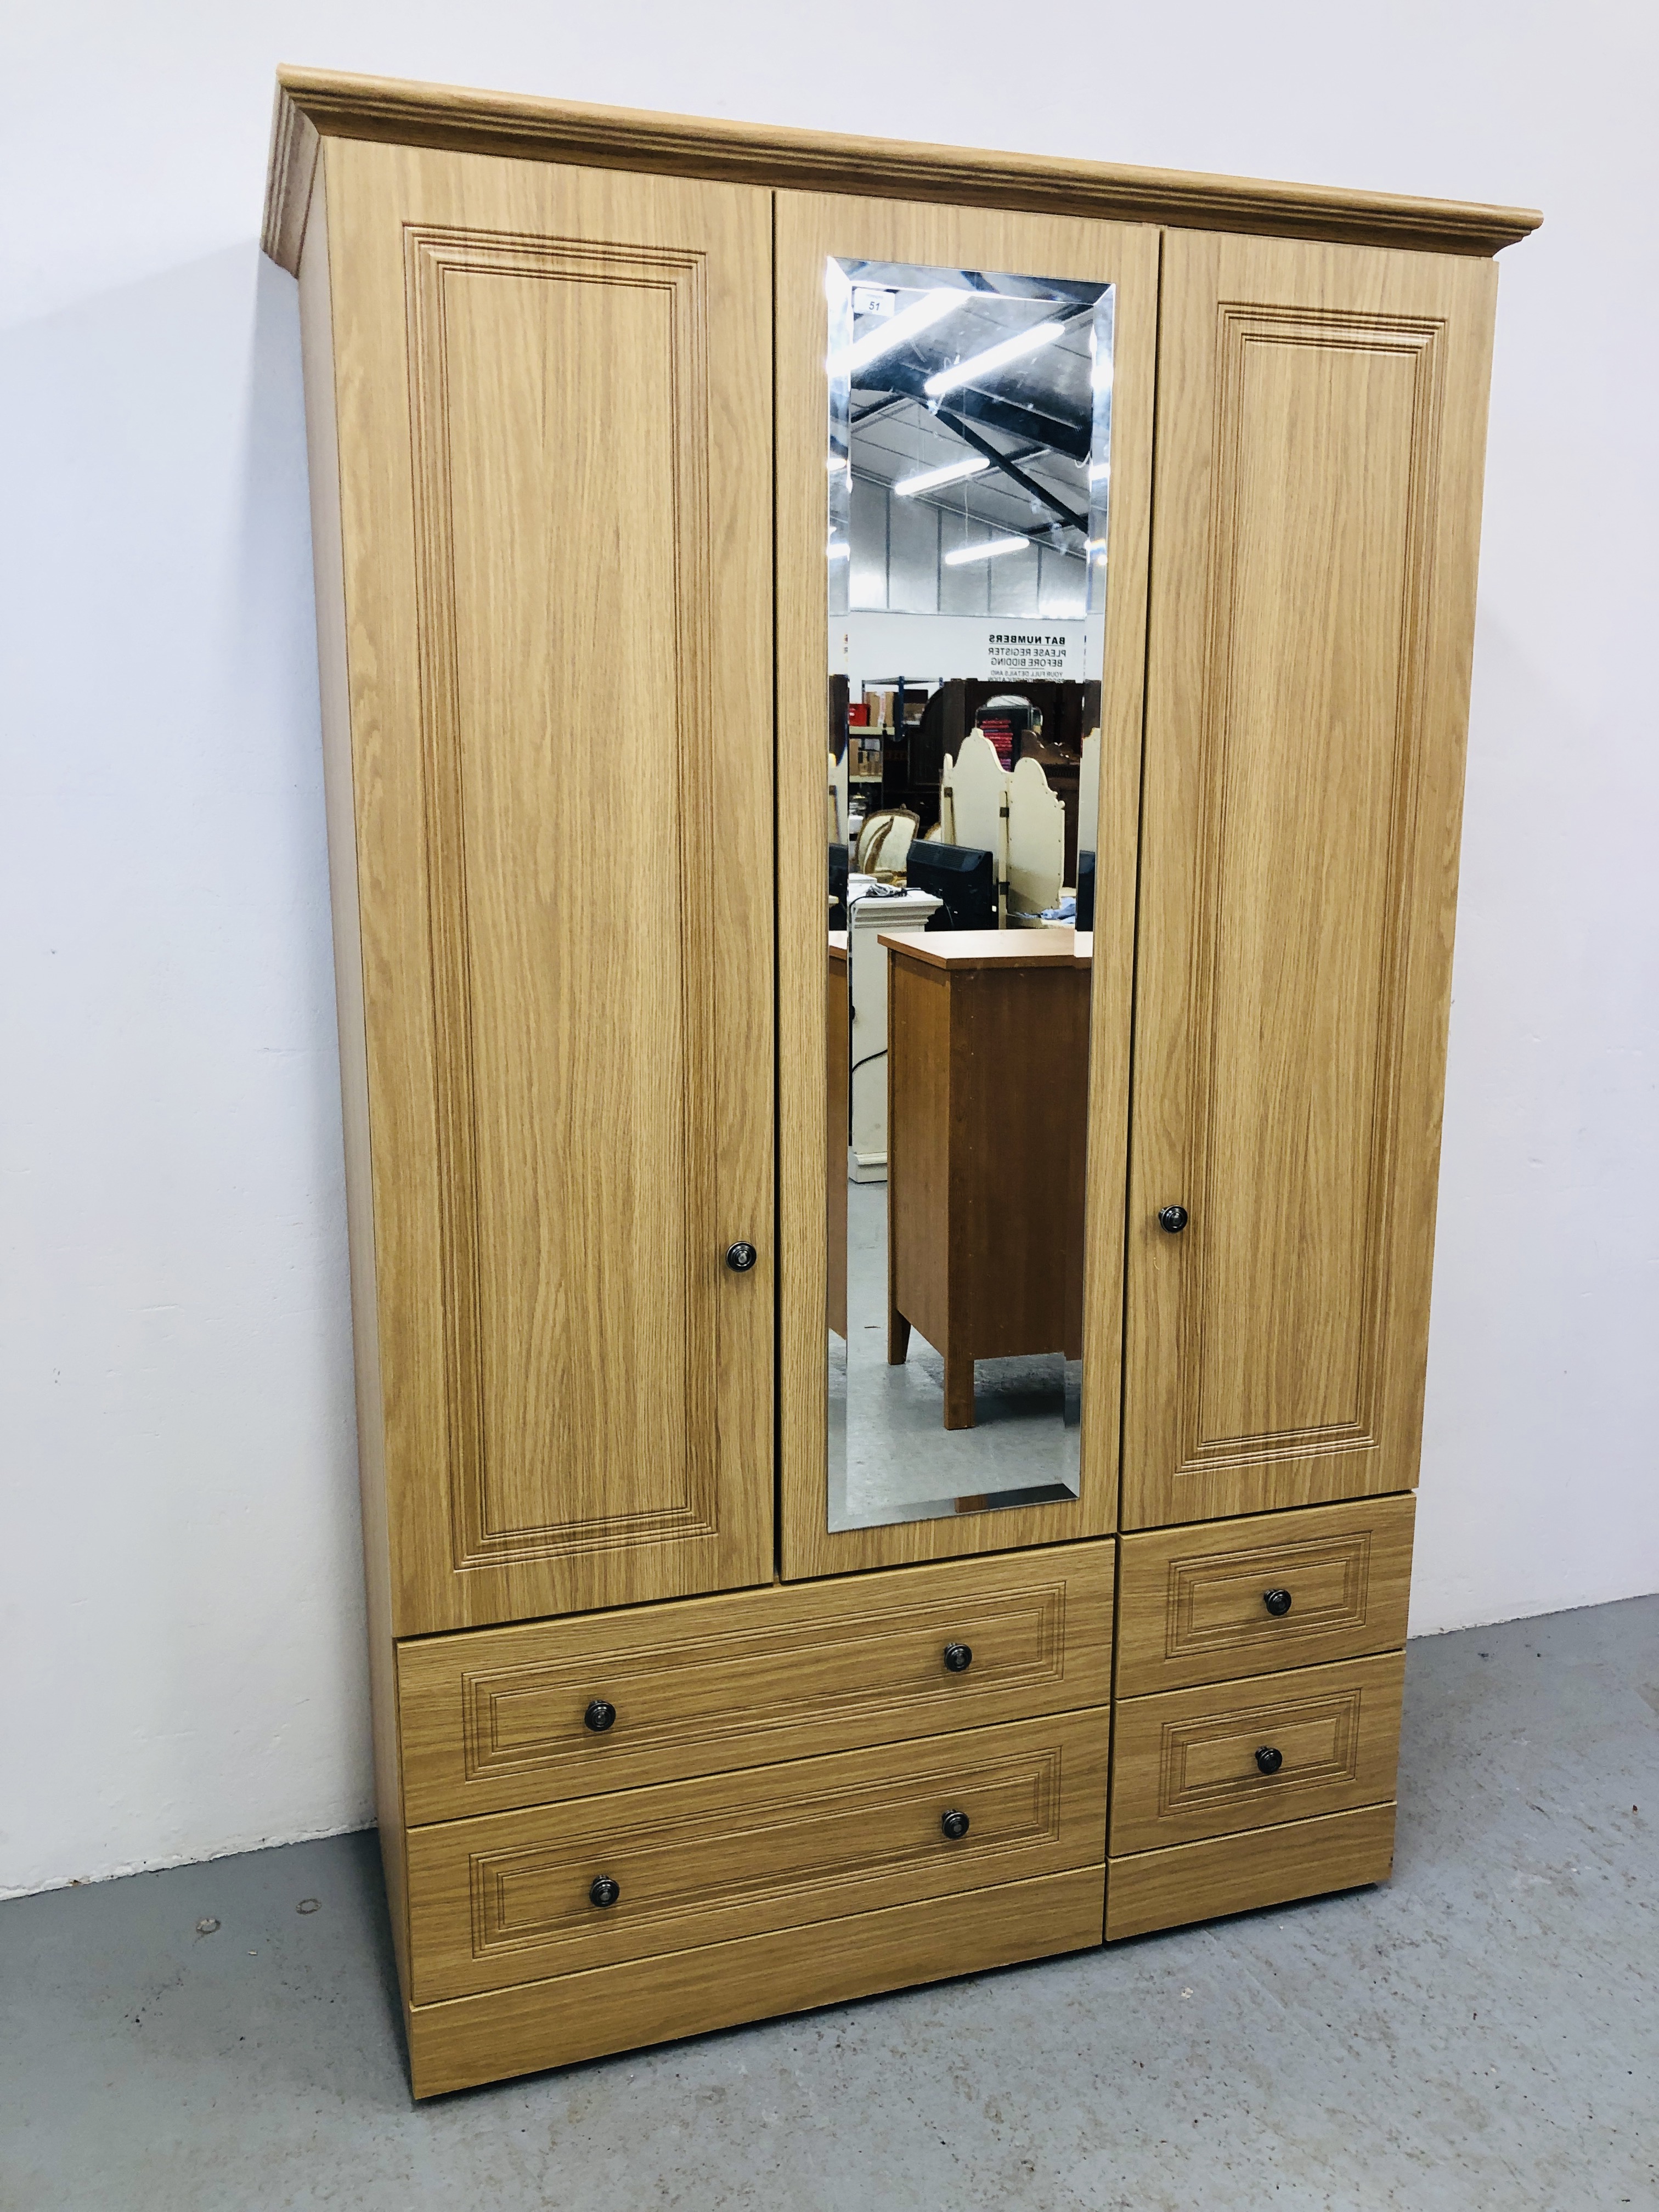 KINGSTOWN TOLEDO OAK FINISH 400RH GENTS THREE DOOR WARDROBE WITH FOUR DRAWER BASE AND MIRRORED